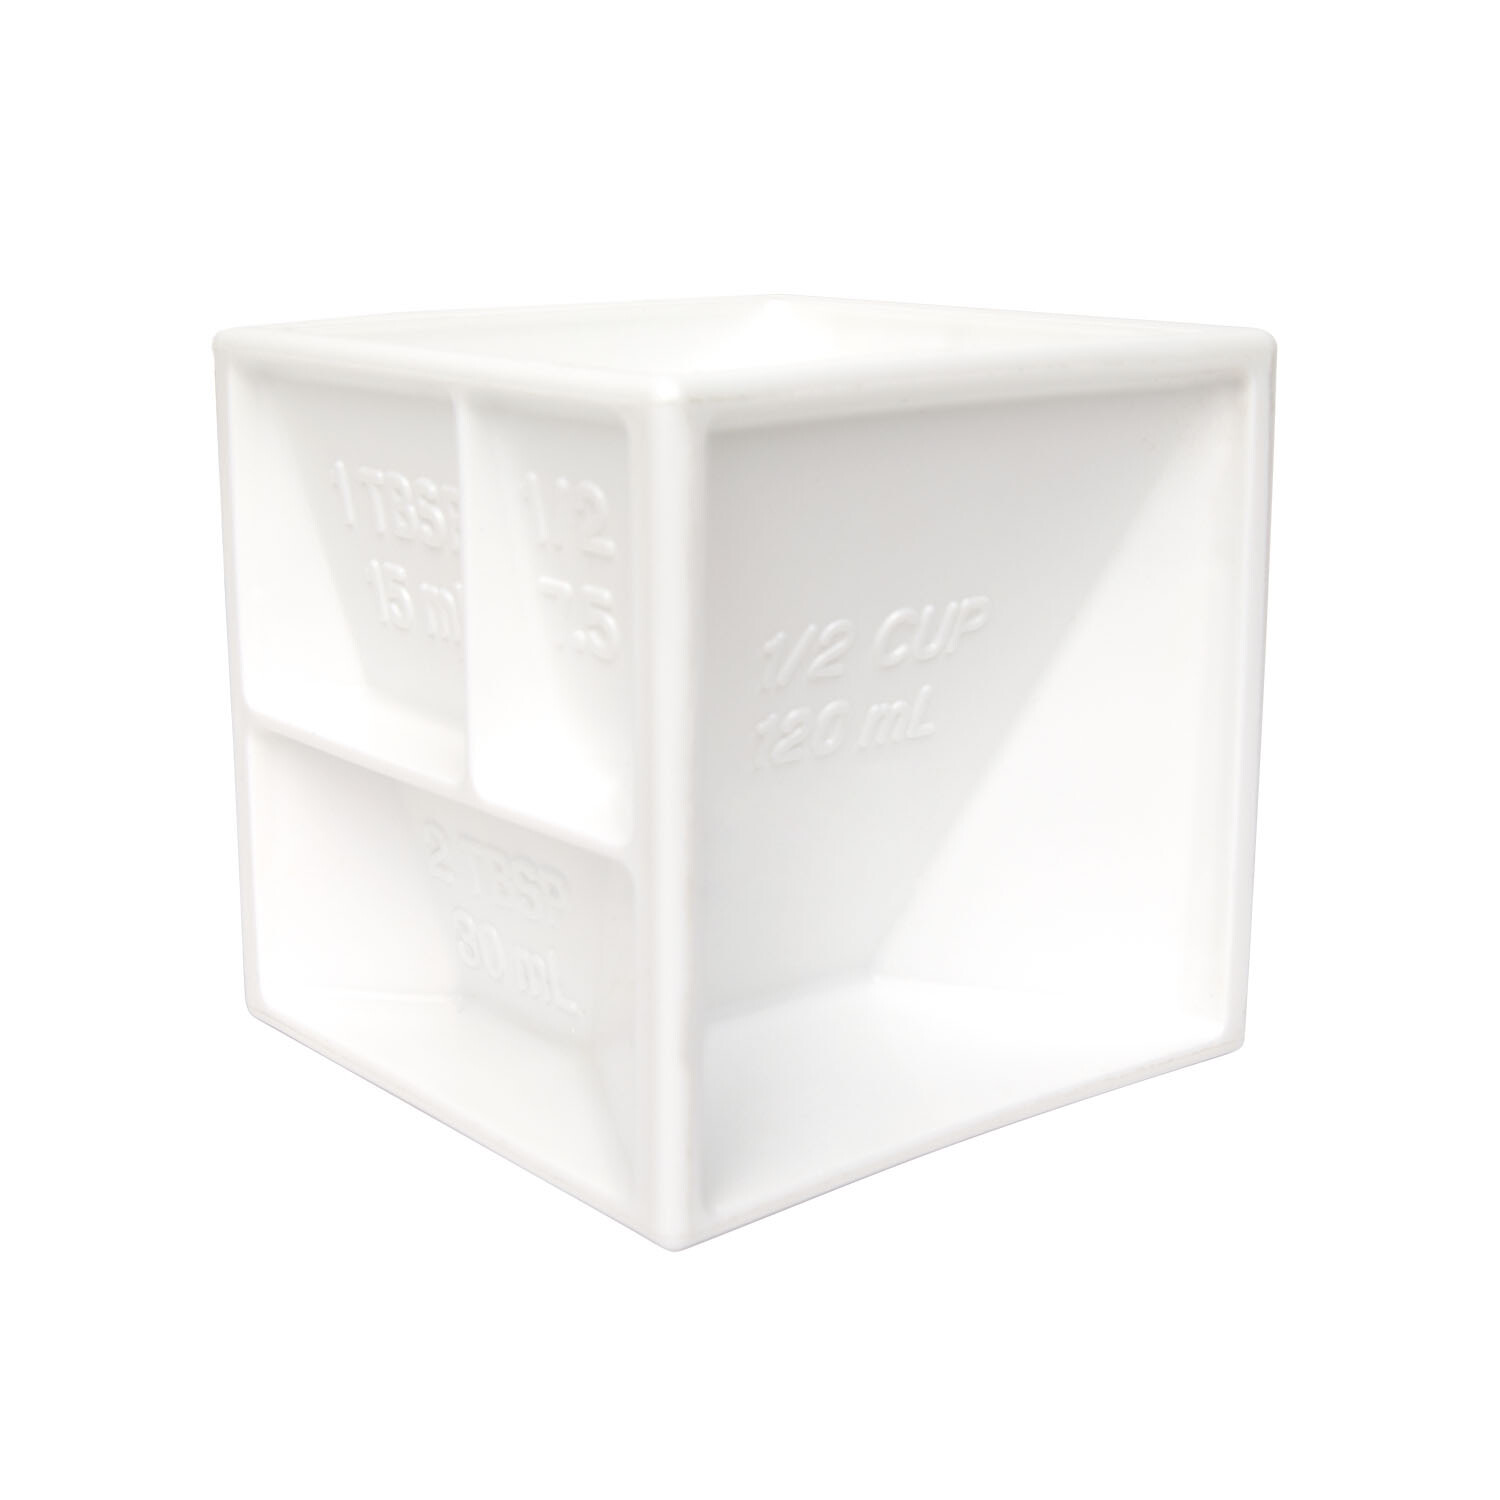 Kitchen Cube ALL-IN-1 Measuring Device - Megerbworld